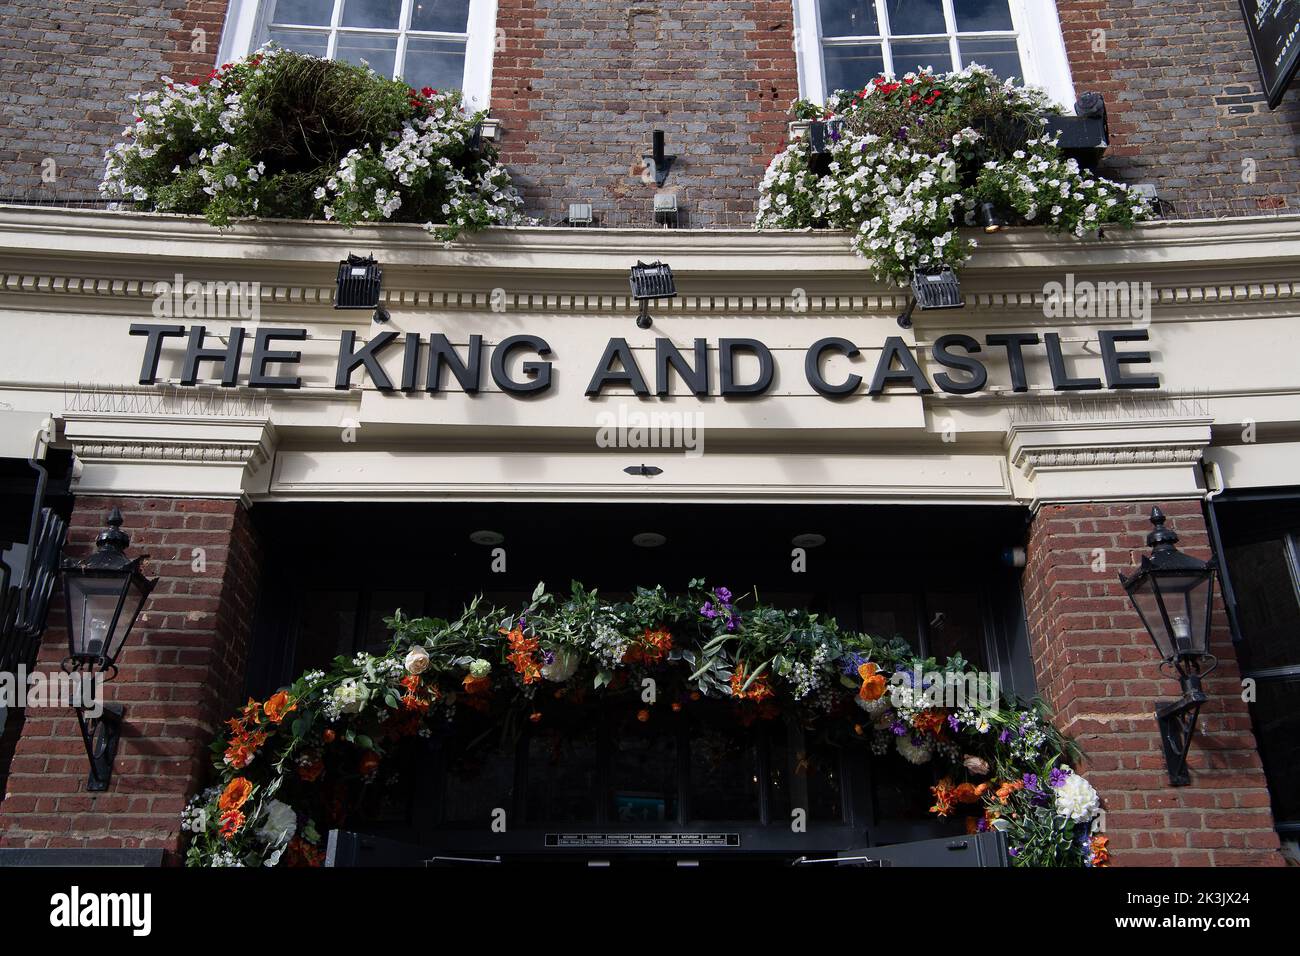 Windsor, Berkshire, UK. 27th September, 2022. The King and Castle pub in Windsor. Pub chain J D Wetherspoon have announced that they have appointed property agents Savills and CBRE to sell 32 of it pubs across the UK. The popular King and Castle is not for sale but the Hope & Champion pub in Beaconsfield, Buckinghamshire is one of the pubs listed for sale. Credit: Maureen McLean/Alamy Live News Stock Photo